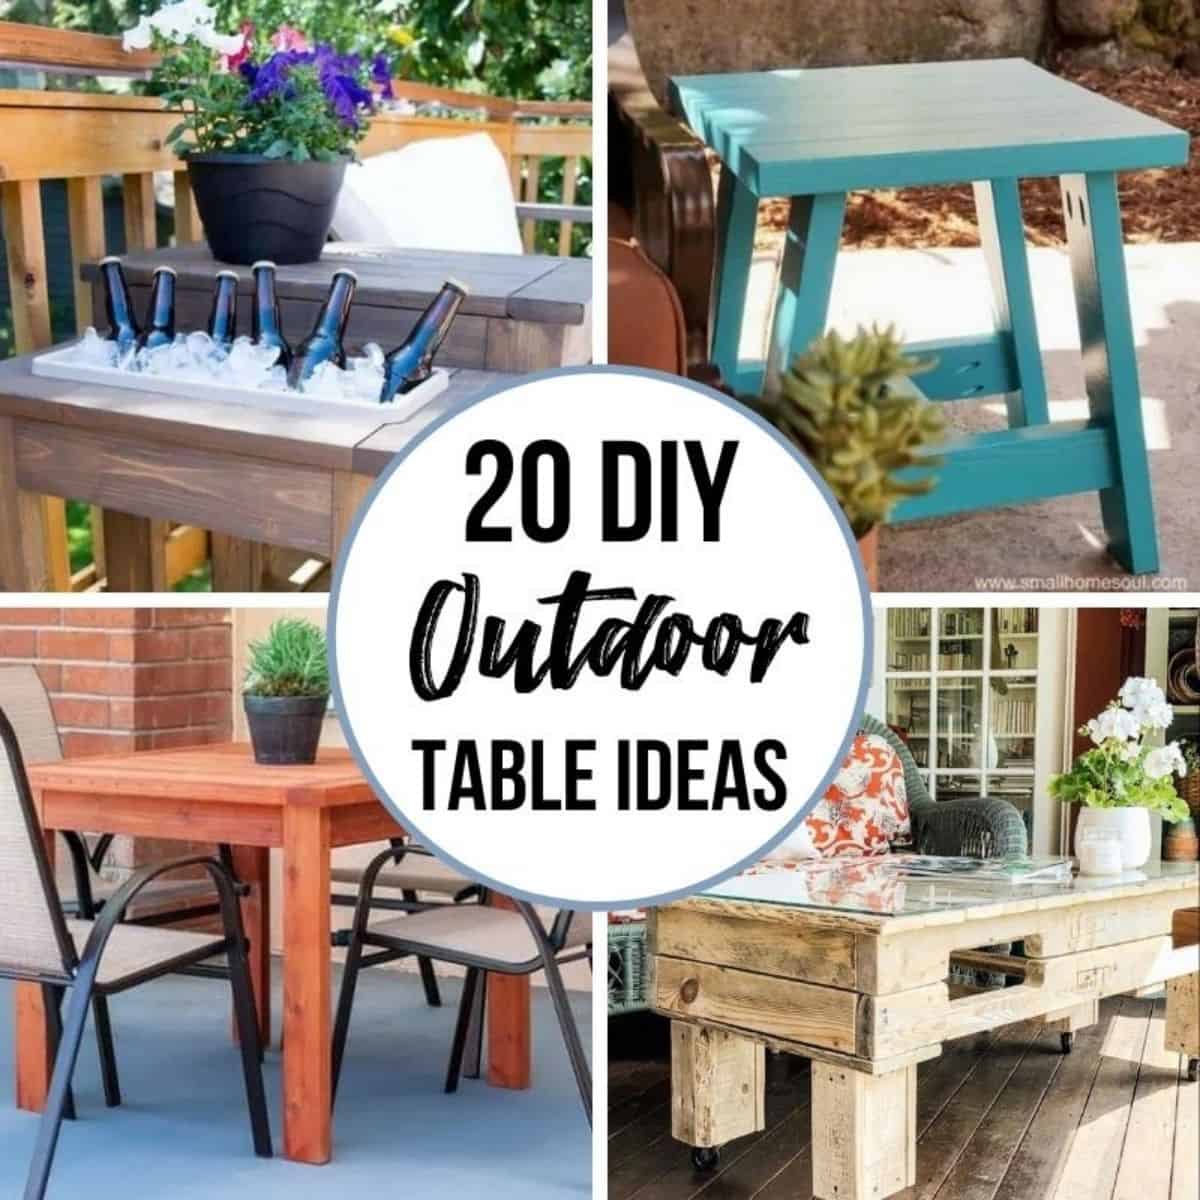 https://www.thehandymansdaughter.com/wp-content/uploads/2021/06/diy-outdoor-table-ideas-The-Handymans-Daughter-1200-sq.jpg